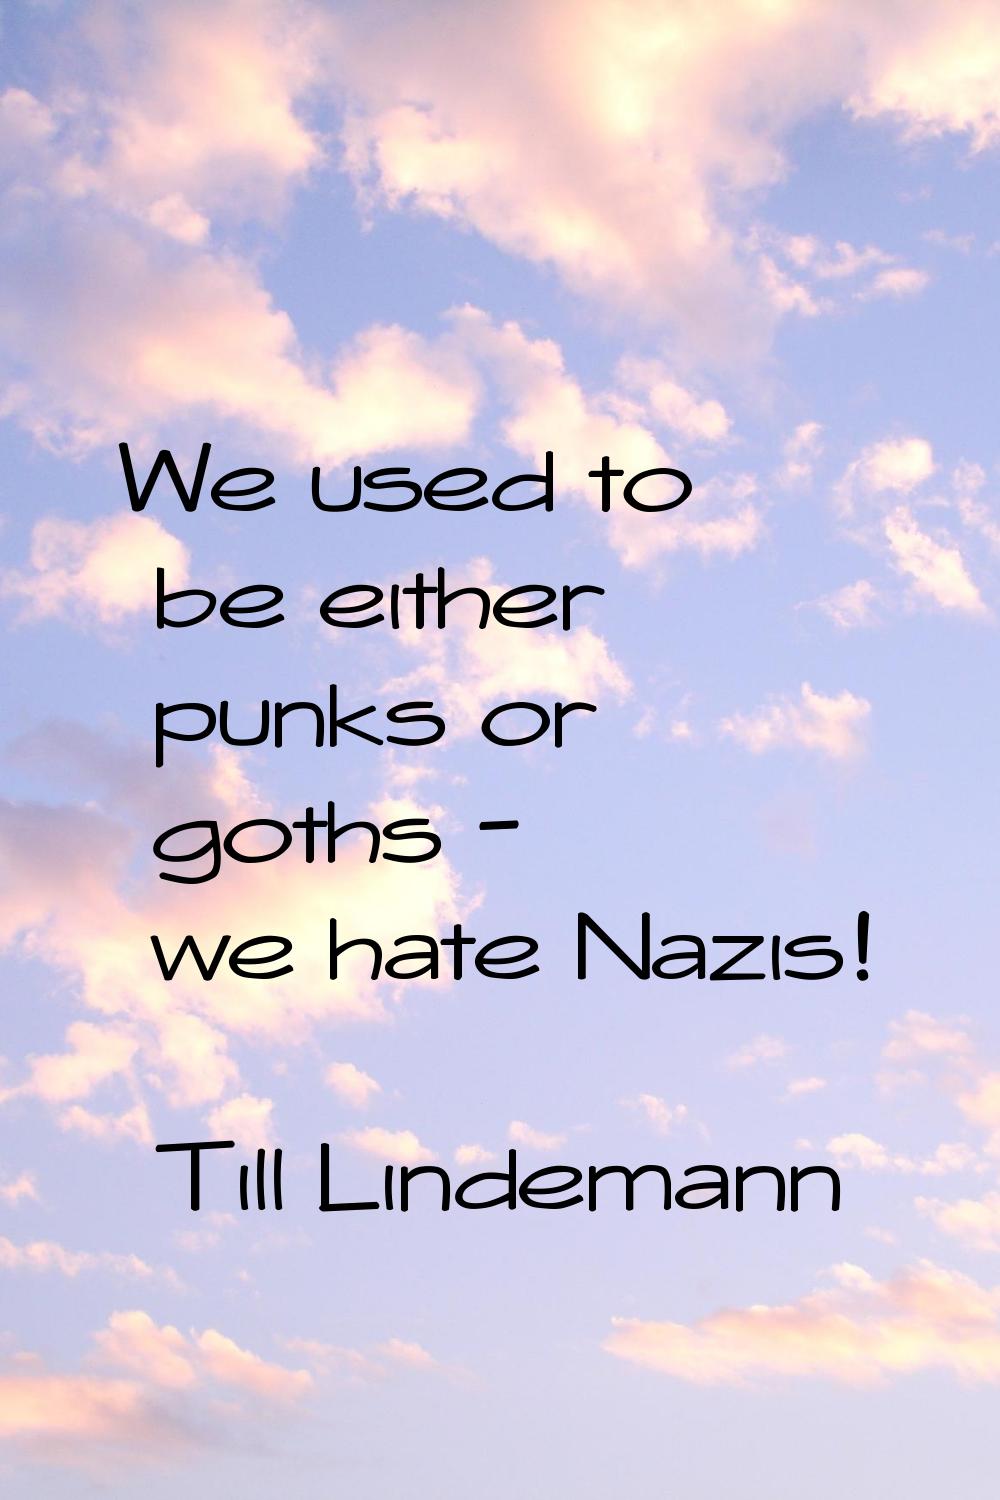 We used to be either punks or goths - we hate Nazis!